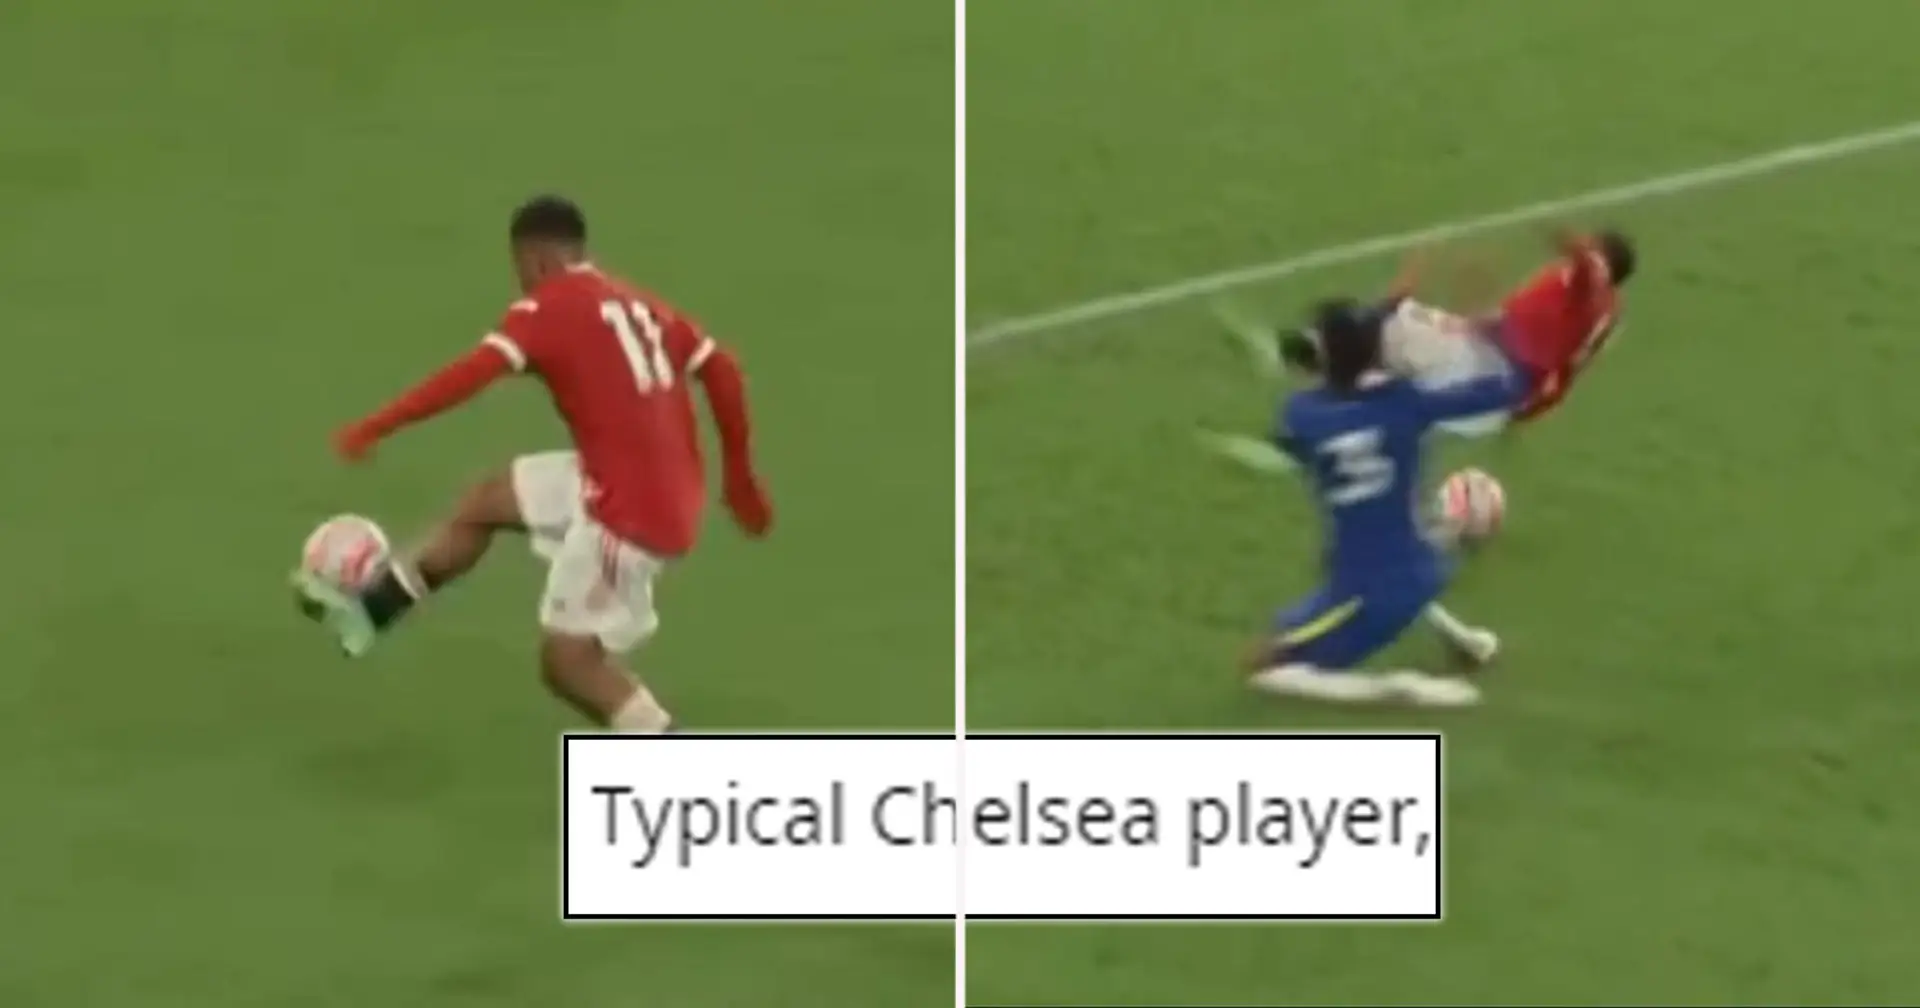 ‘Wasn’t even going for the ball’: United fans lash out at Chelsea U23 defender for awful challenge on Dillon Hoogewerf